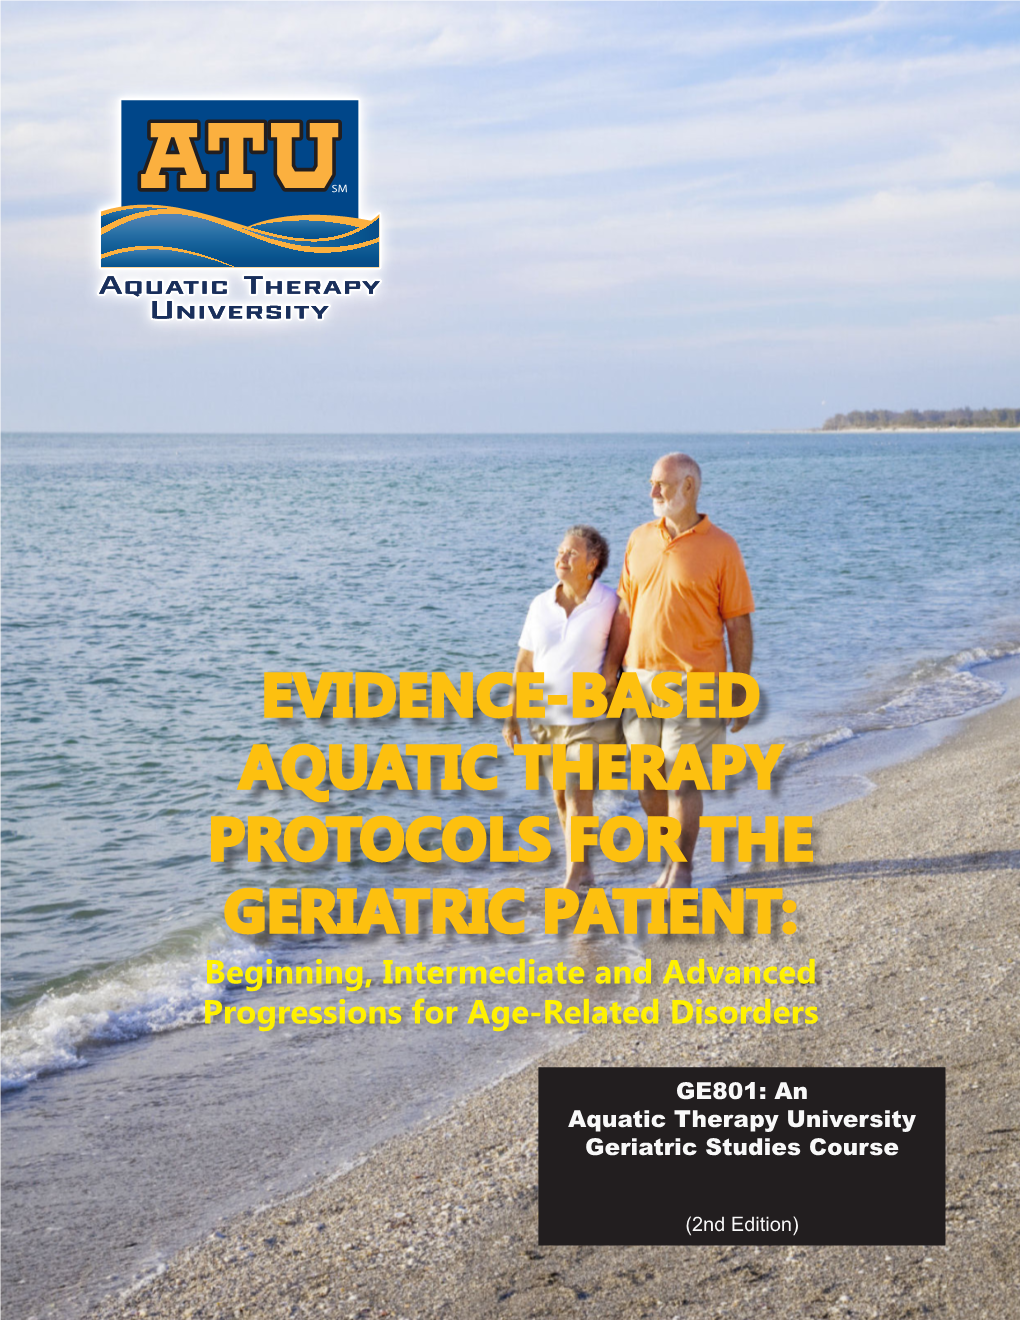 EVIDENCE-BASED AQUATIC THERAPY PROTOCOLS for the GERIATRIC PATIENT: Beginning, Intermediate and Advanced Progressions for Age-Related Disorders